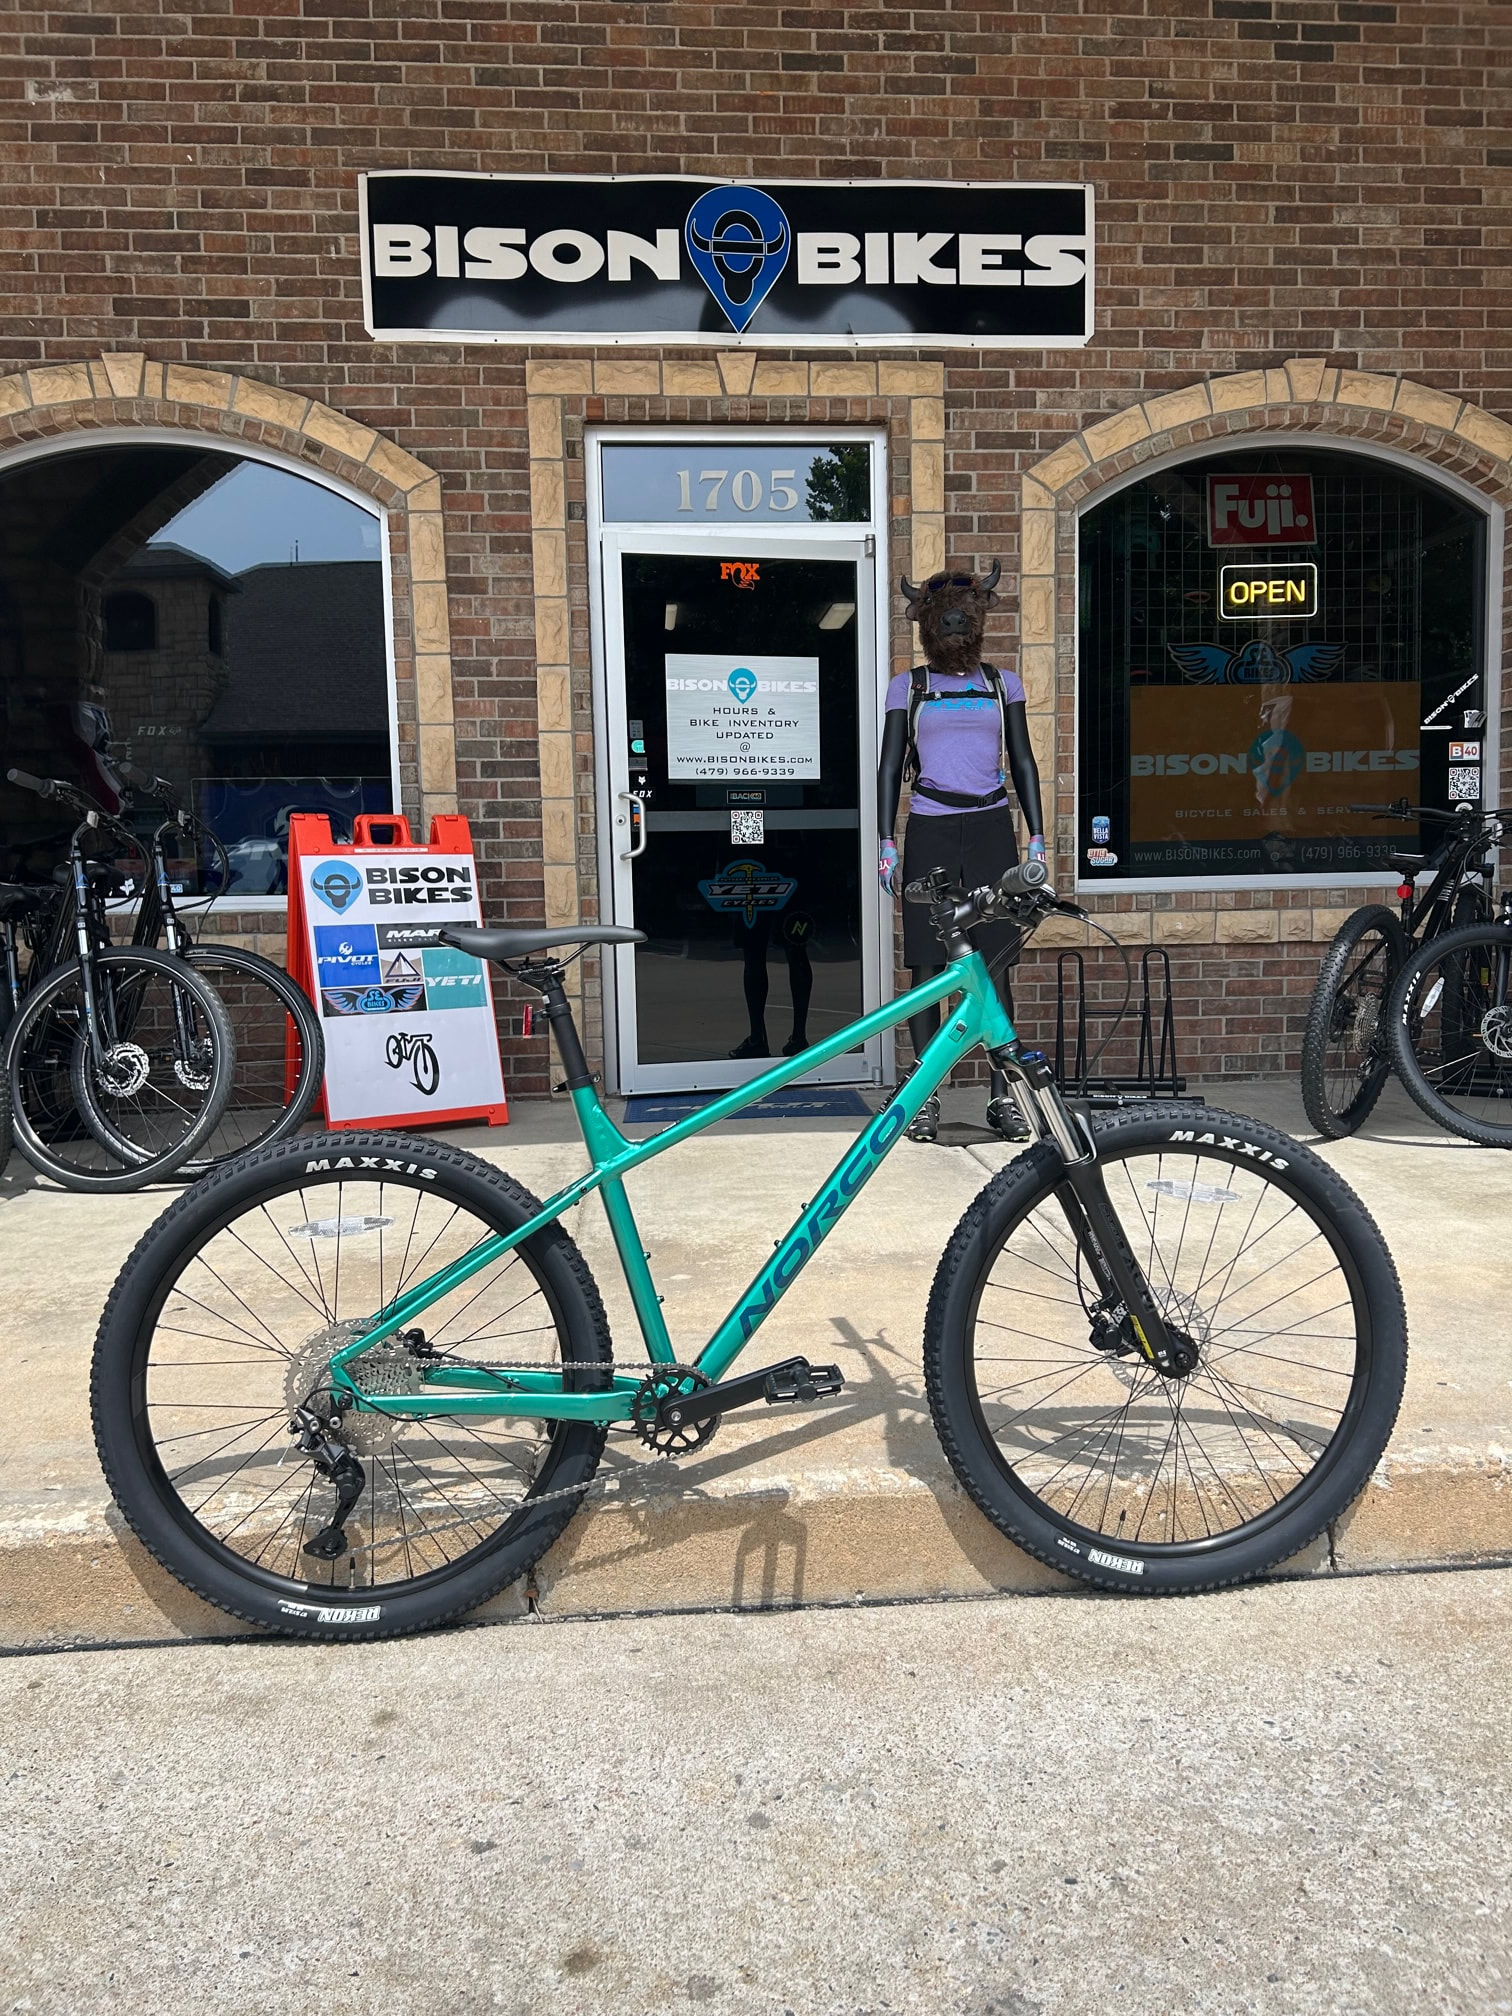 2023 NORCO STORM 2 in 29er or 27.5 Cross Country MTB (Small Blue/Gray 27.5 and Large Green 29er In Stock Now!! All 3 Colors and All Sizes Also Available Quickly)